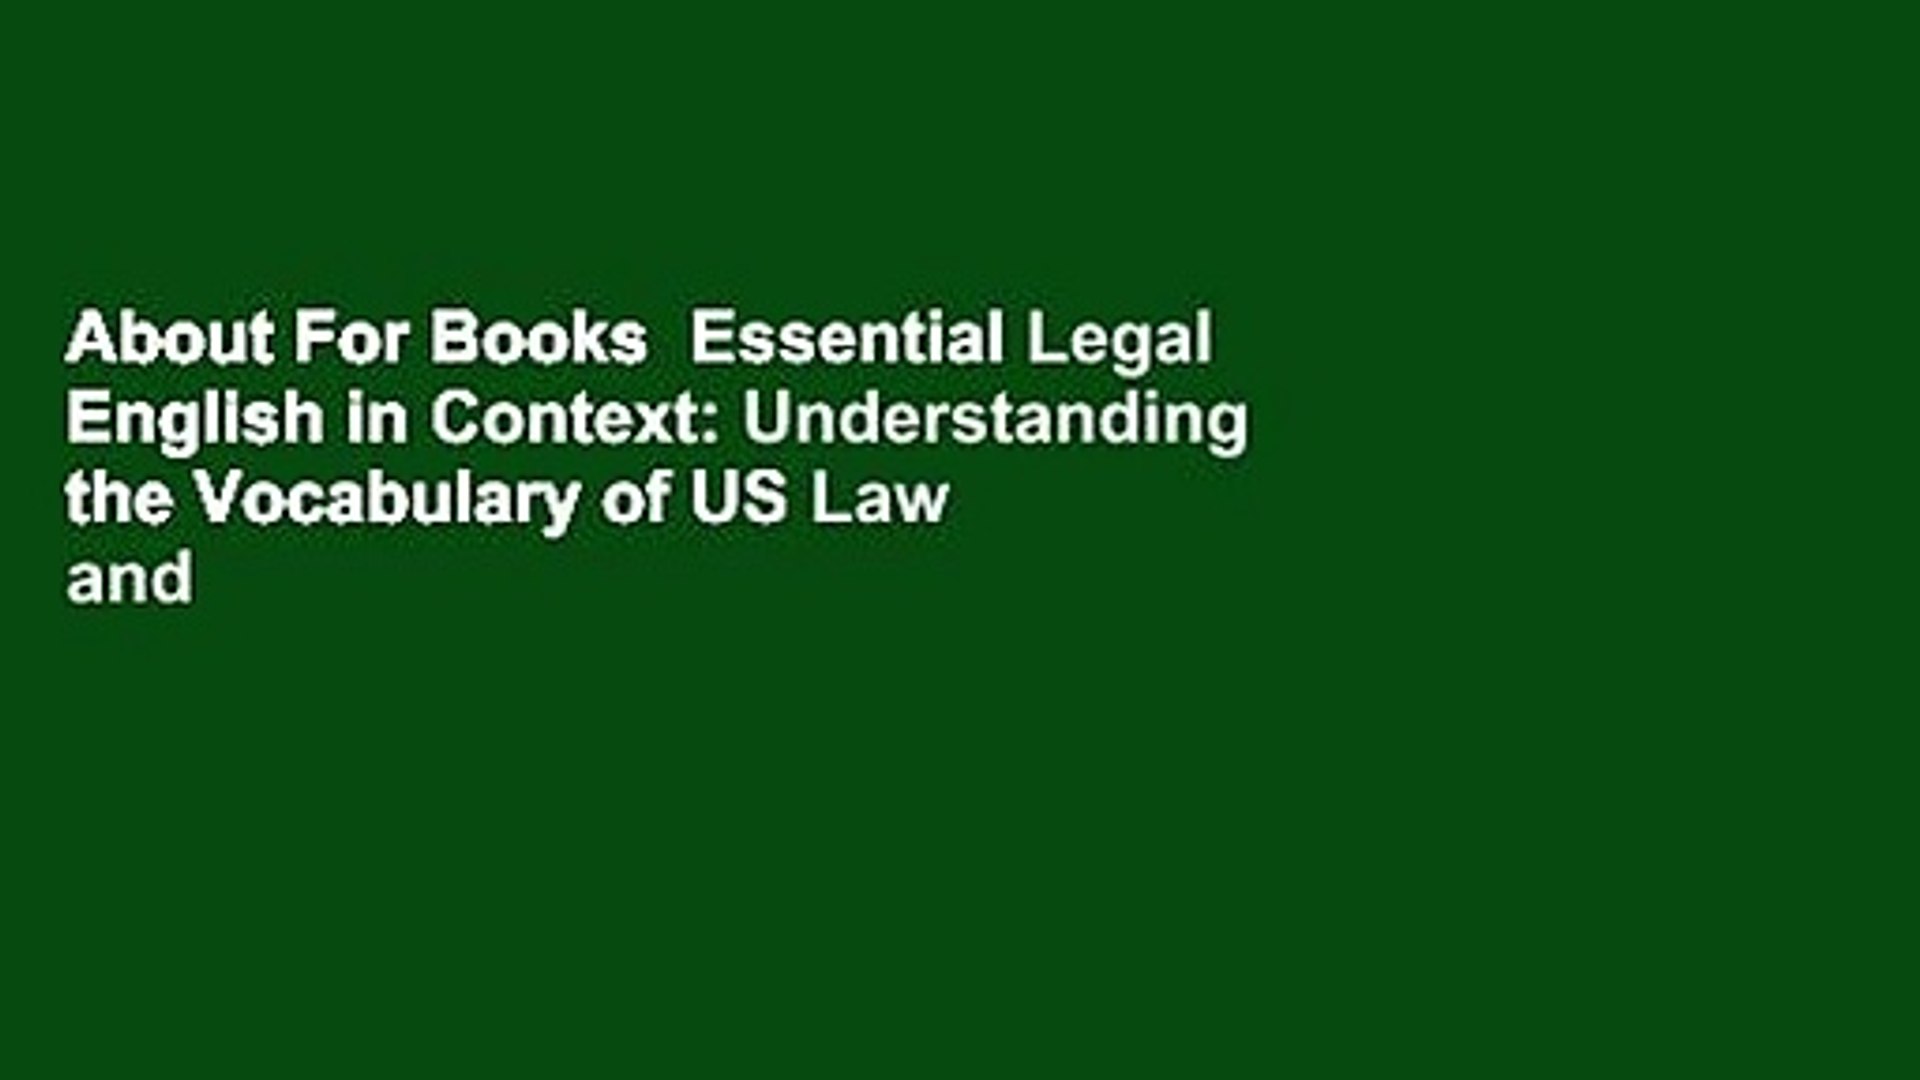 About For Books  Essential Legal English in Context: Understanding the Vocabulary of US Law and